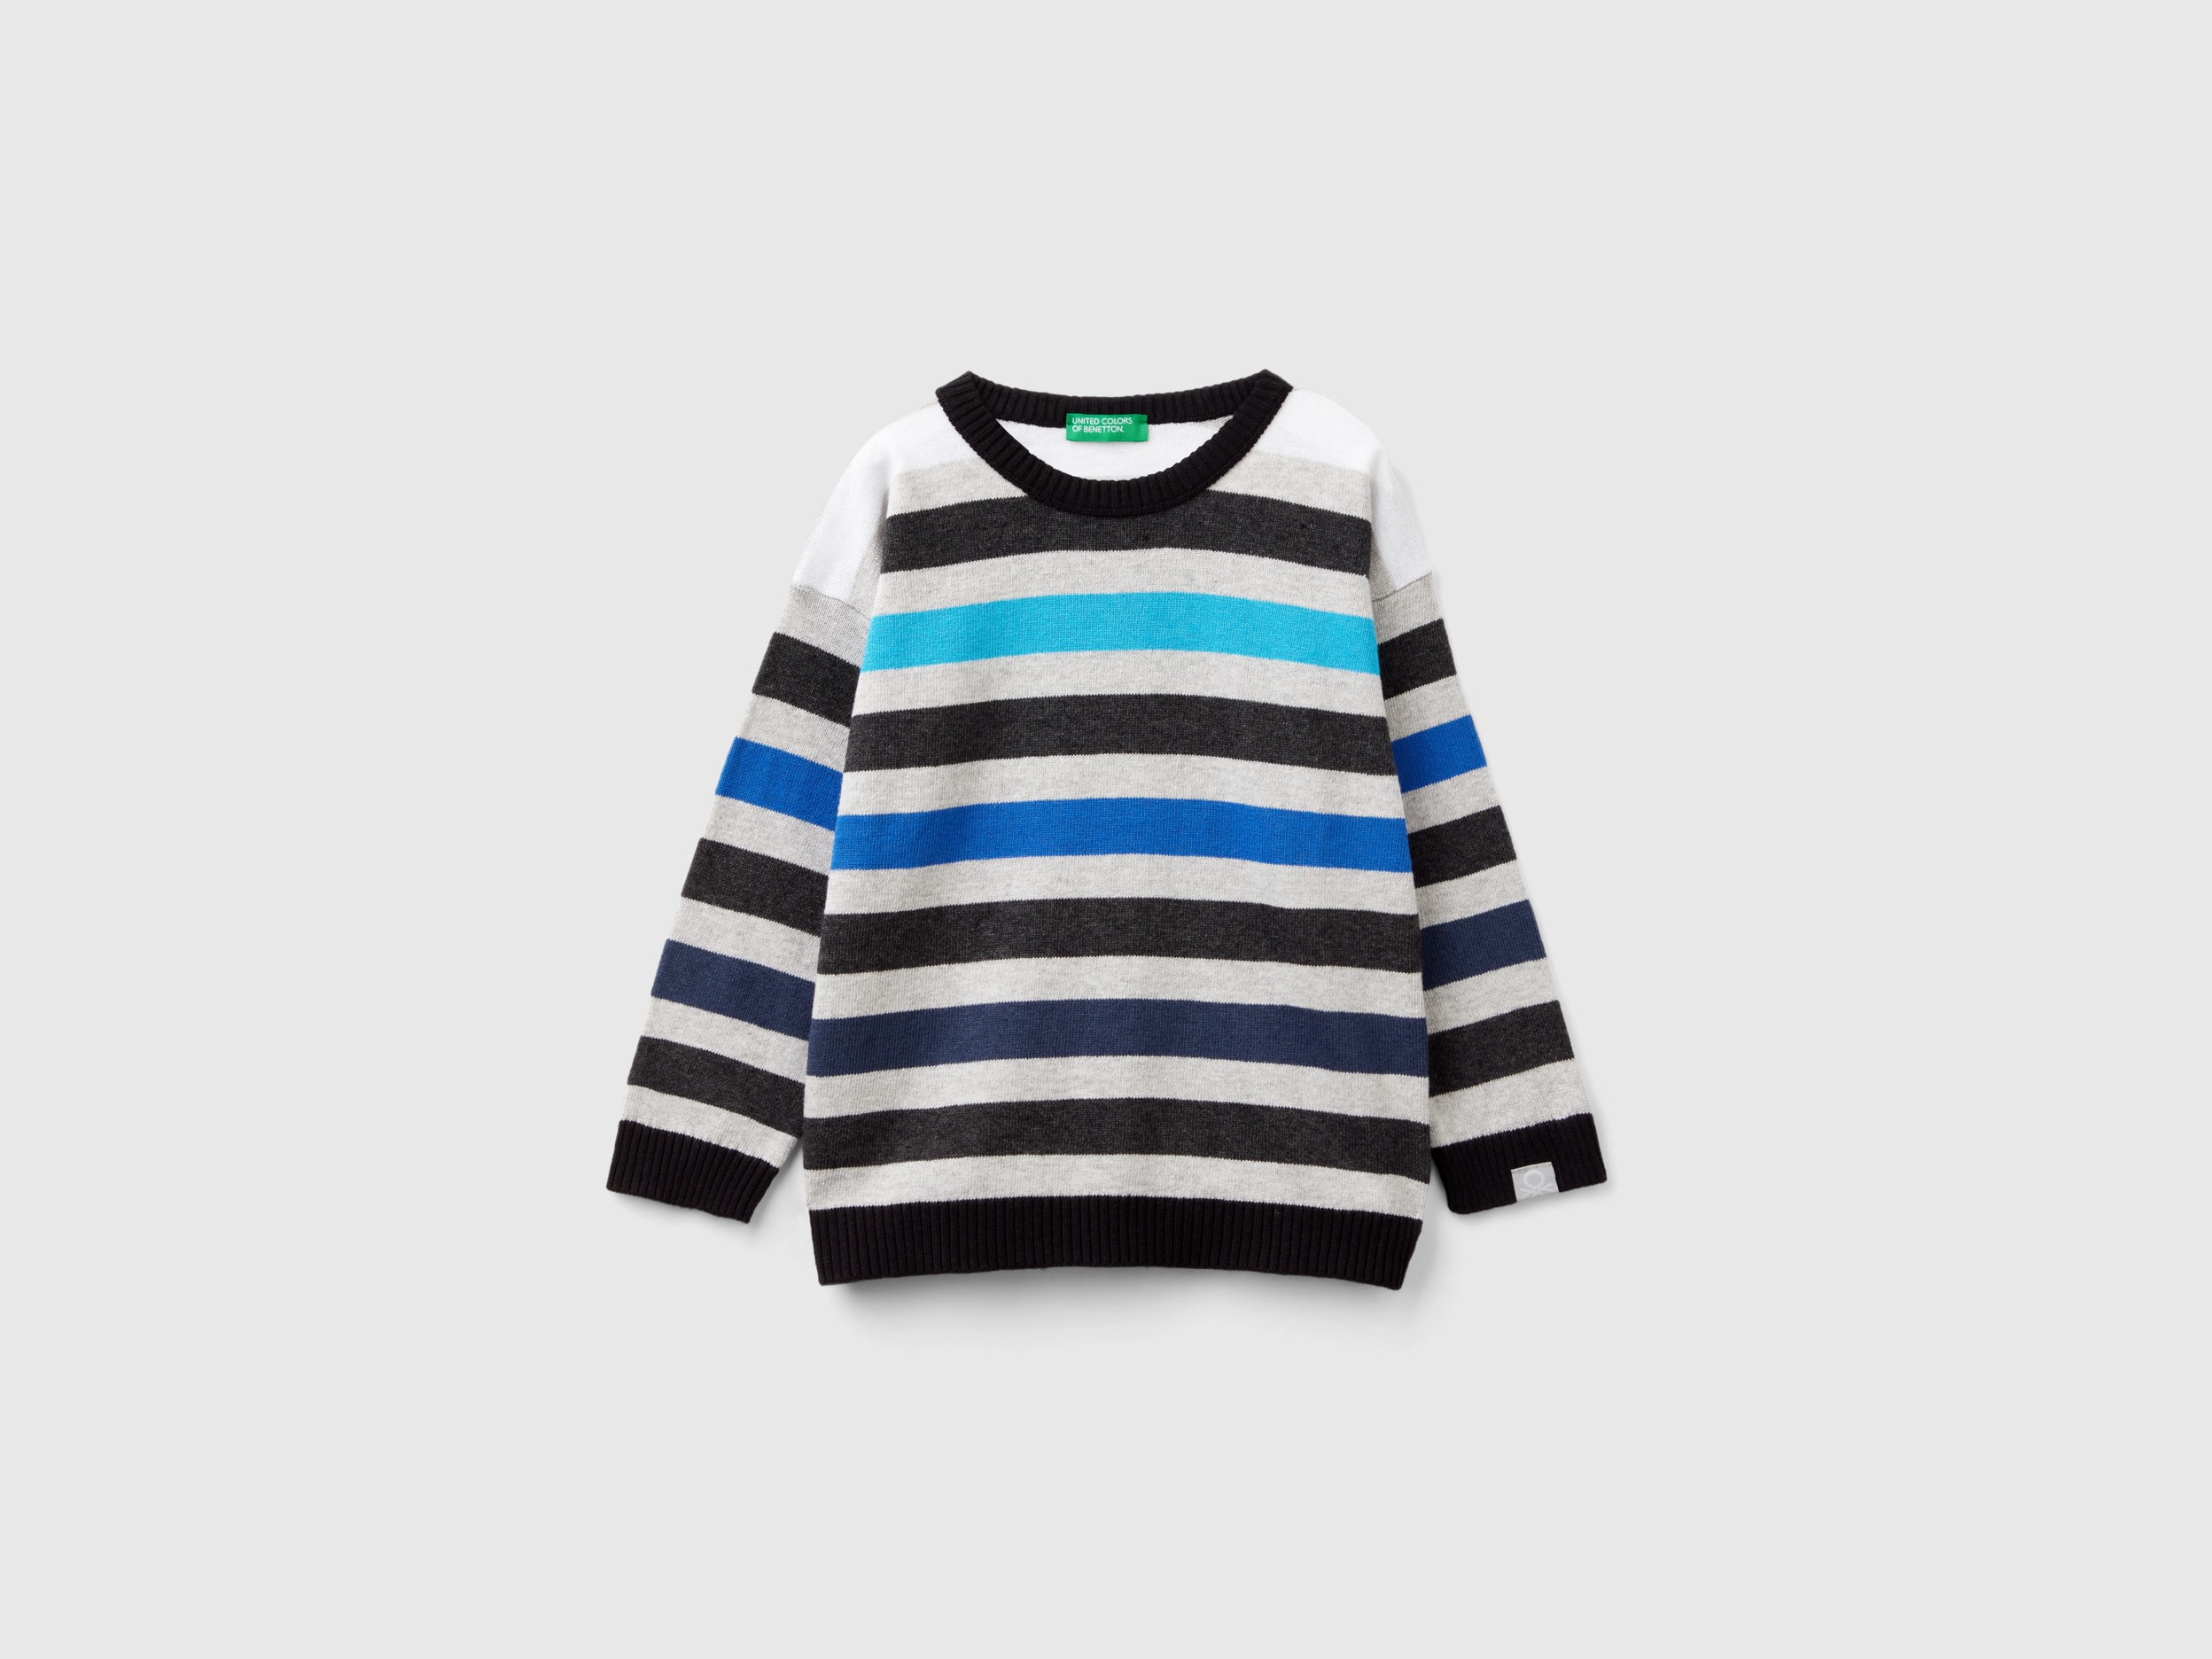 Image of Benetton, Striped Sweater, size 82, Multi-color, Kids